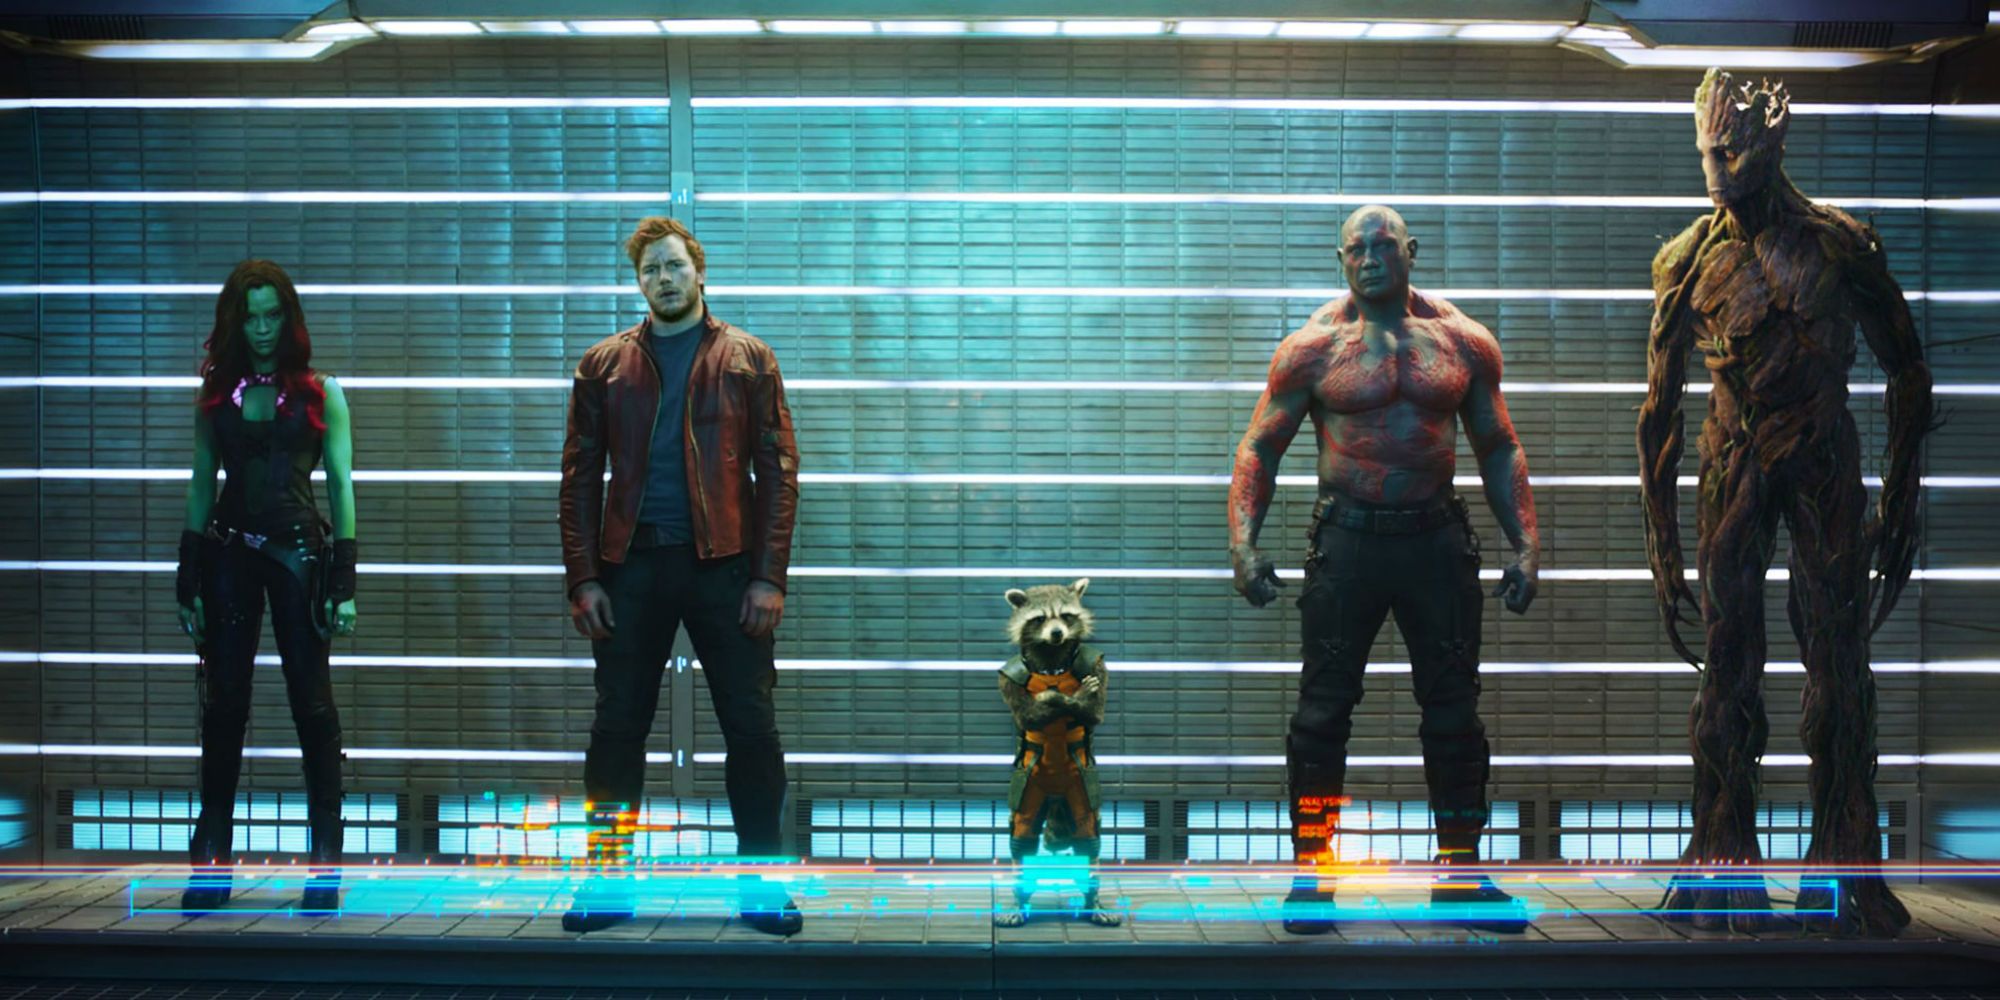 guardians of the galaxy 2 free online streaming full movie